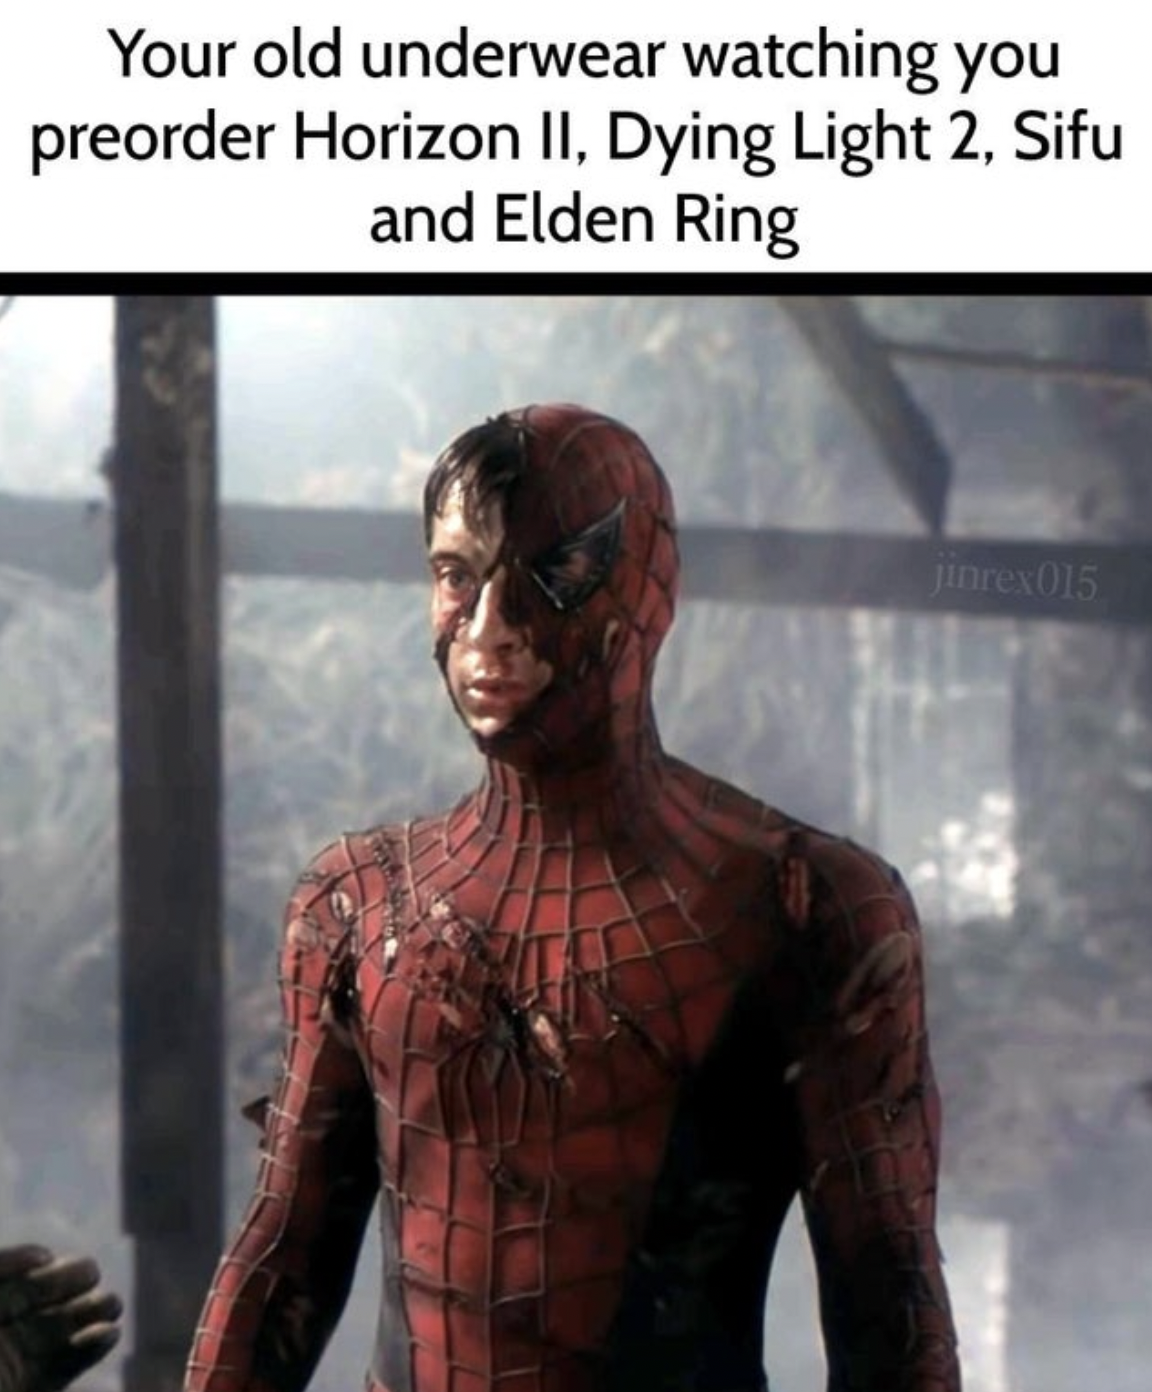 Spider-Man PS4 Memes - human - Your old underwear watching you preorder Horizon Ii, Dying Light 2, Sifu and Elden Ring Jinrex015